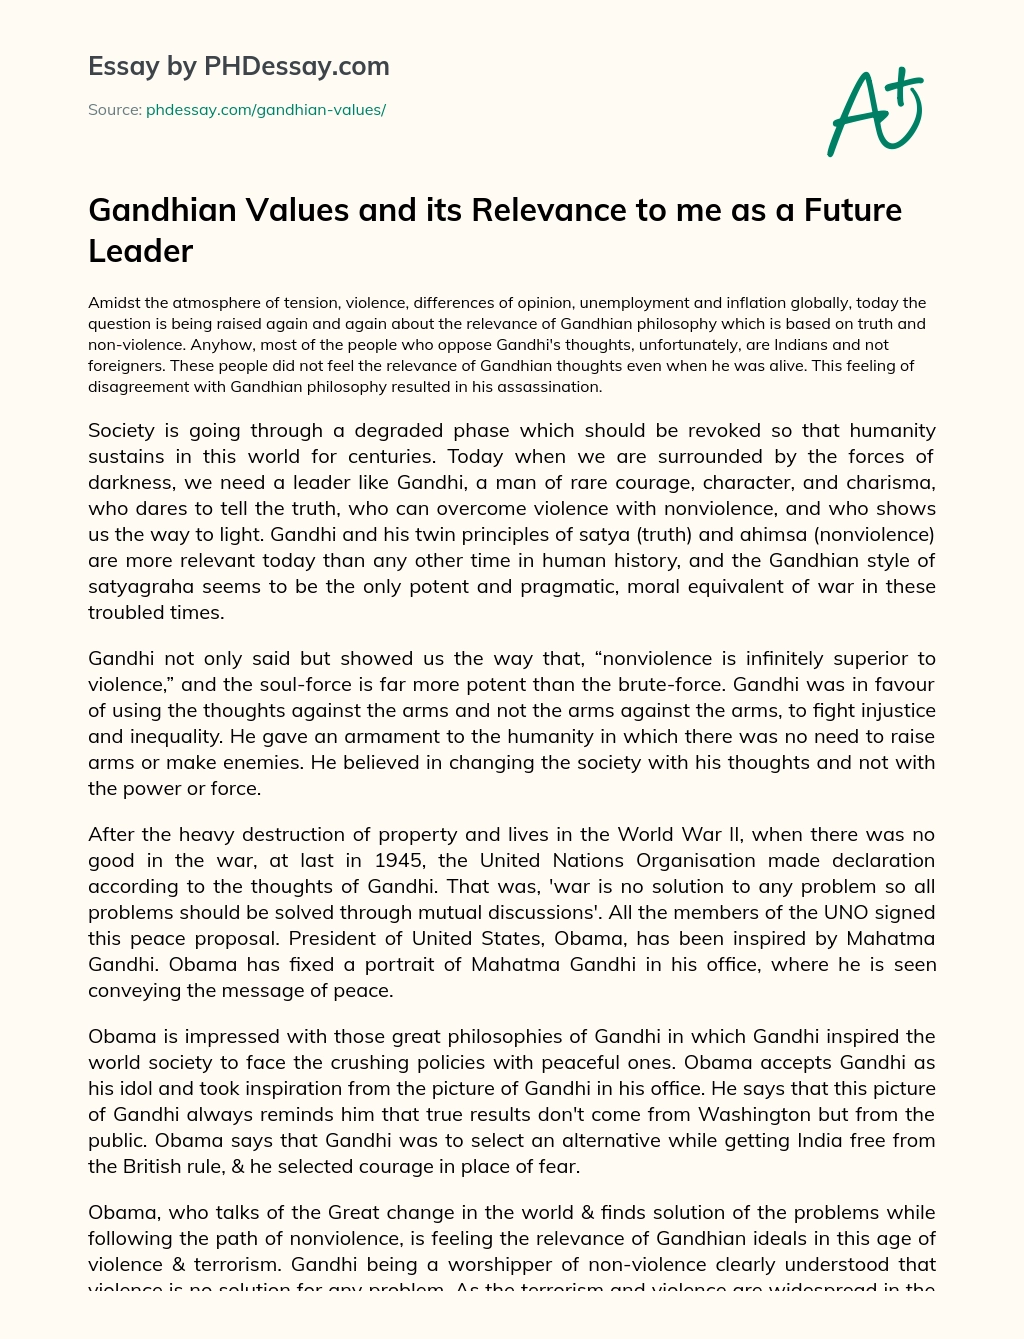 Gandhian Values and its Relevance to me as a Future Leader essay